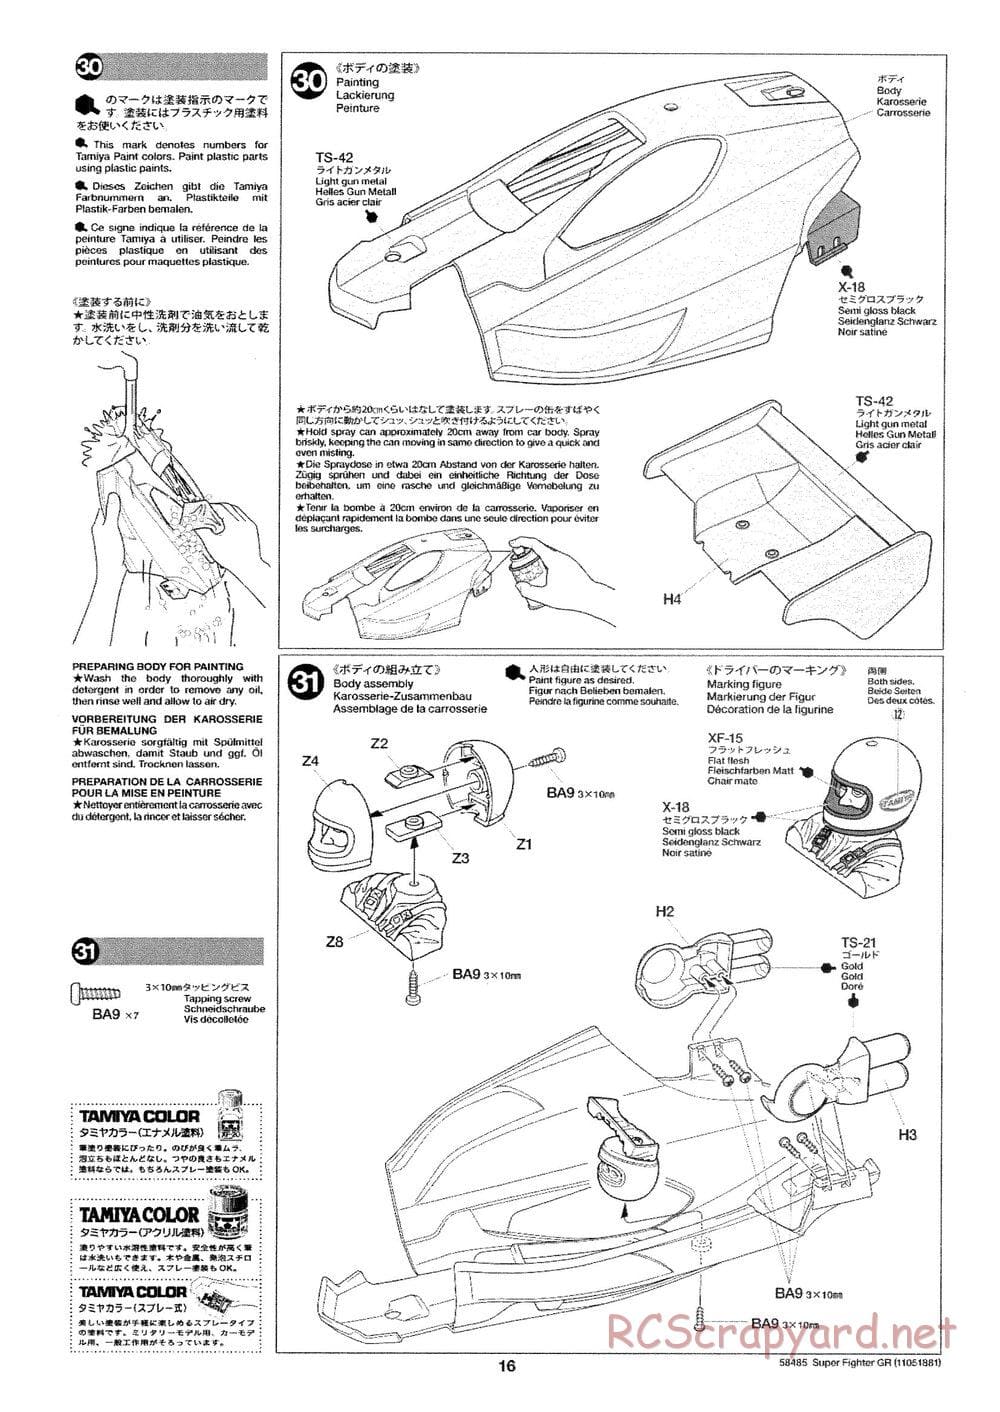 Tamiya - Super Fighter GR - DT-02 Chassis - Manual - Page 16